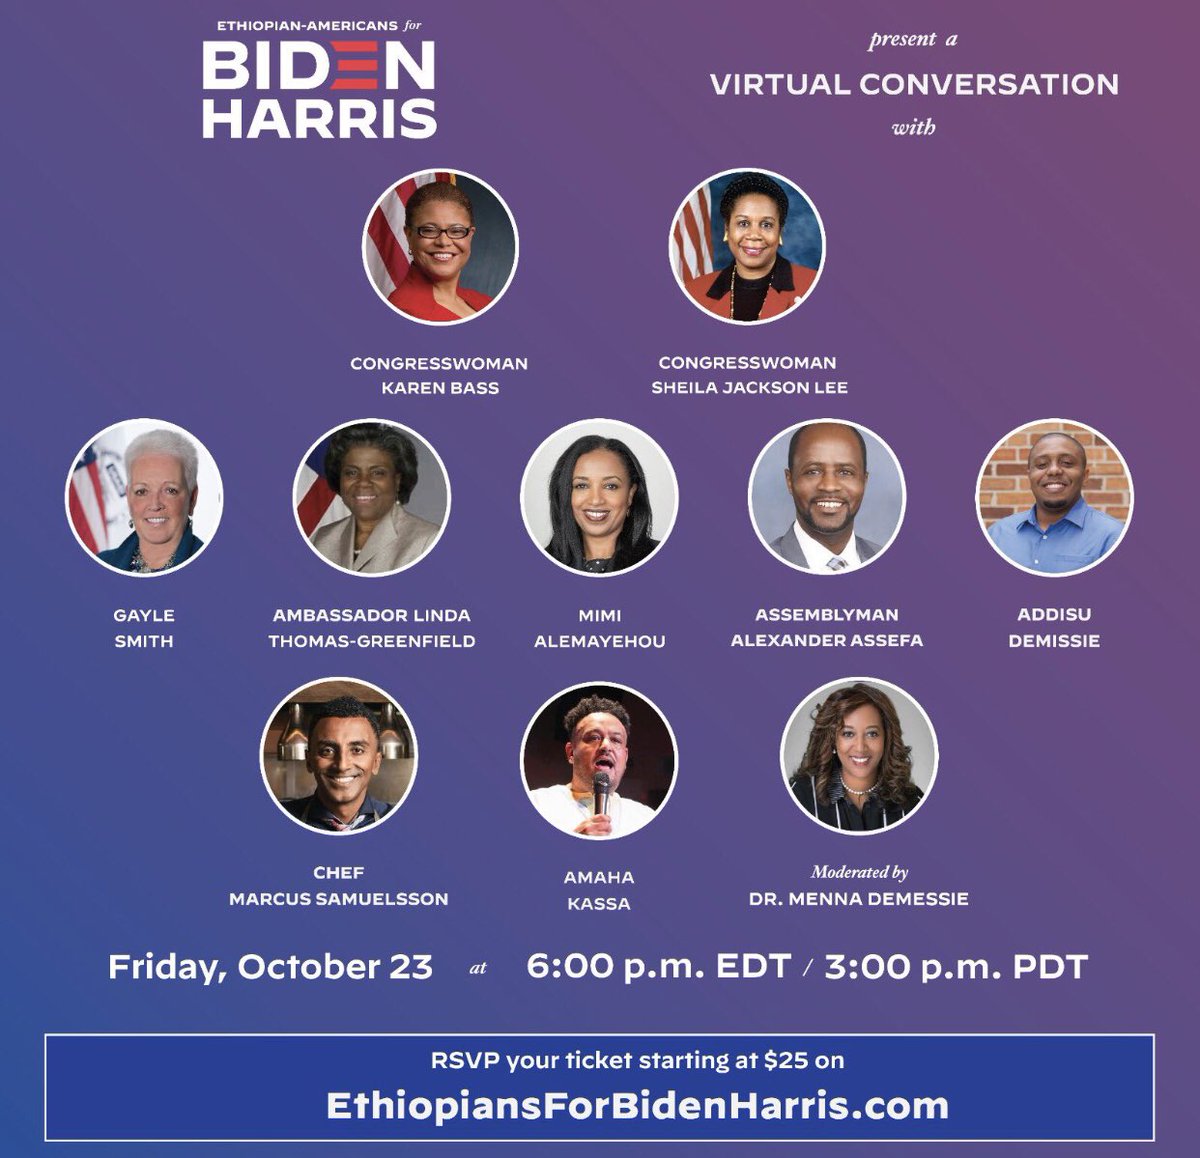 ADOS is ridiculed as divisive while Dr. Demessie gets unrestricted access to representatives that WE voted into office to advocate for our interests too. On October 23 there was even an “Ethiopians for Biden Harris” event on Zoom w/  @RepKarenBass &  @JacksonLeeTX18 in attendance.